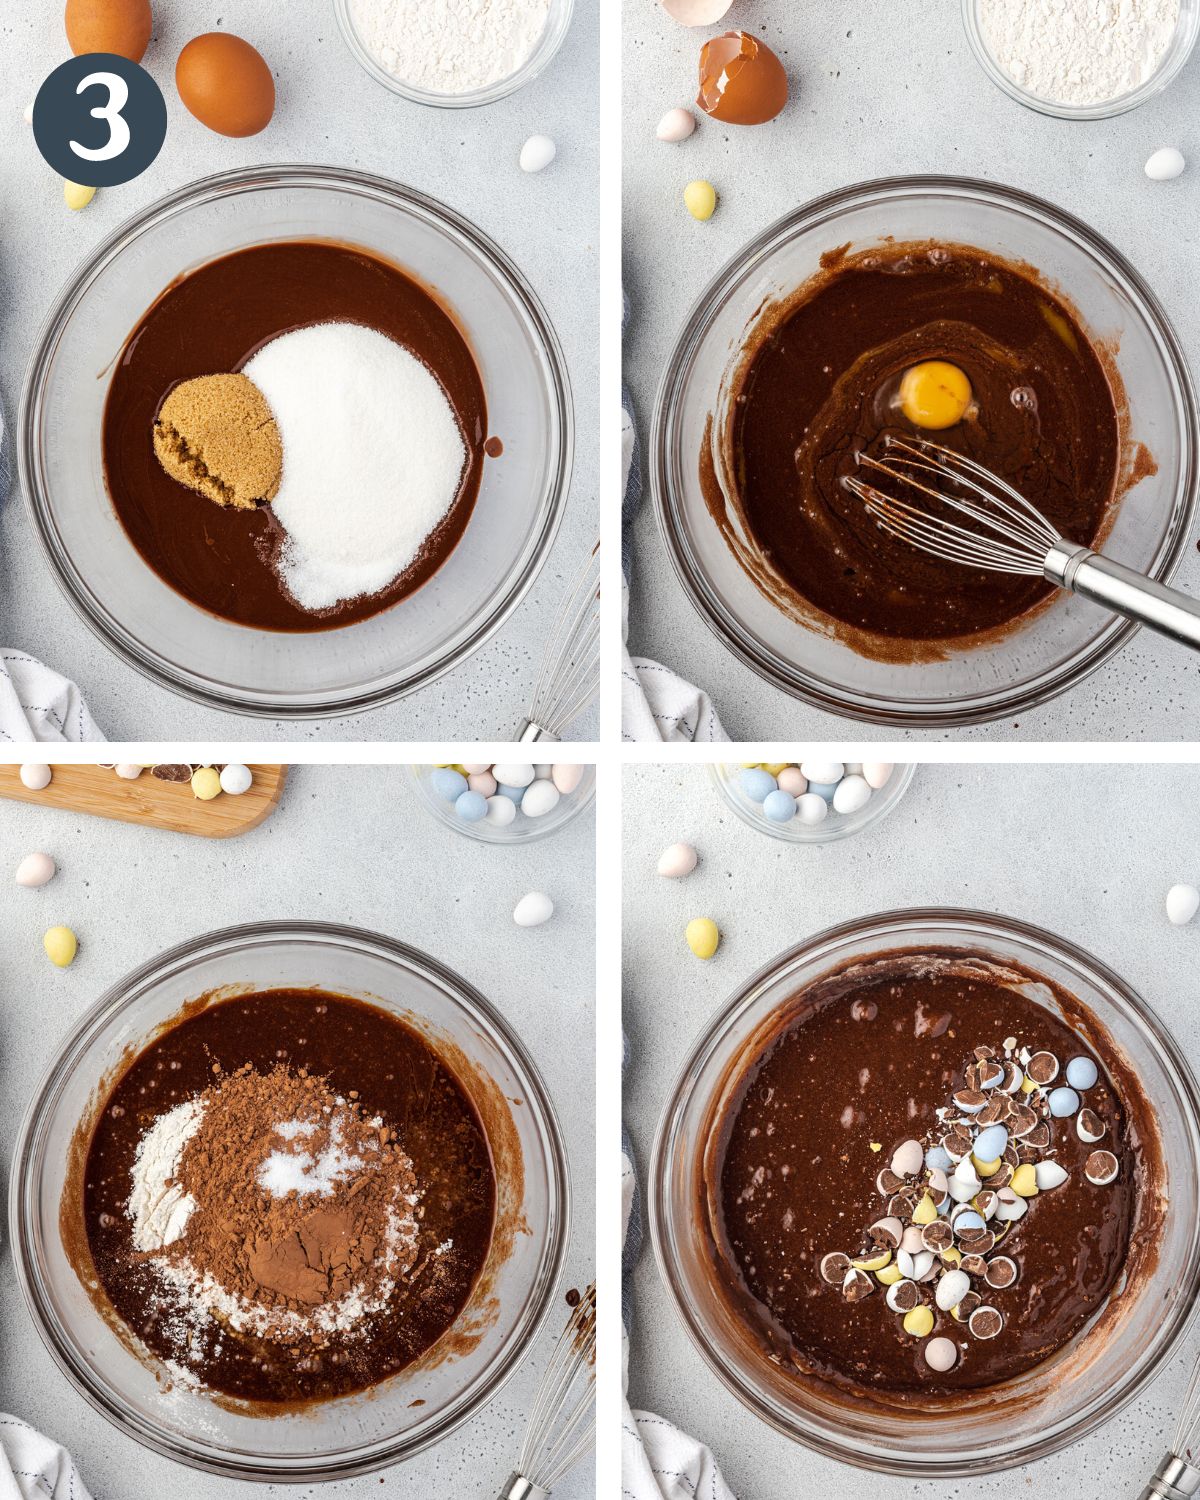 4 images showing steps to prepare batter: Adding sugars, whisking eggs, dry ingredients, and mini eggs.